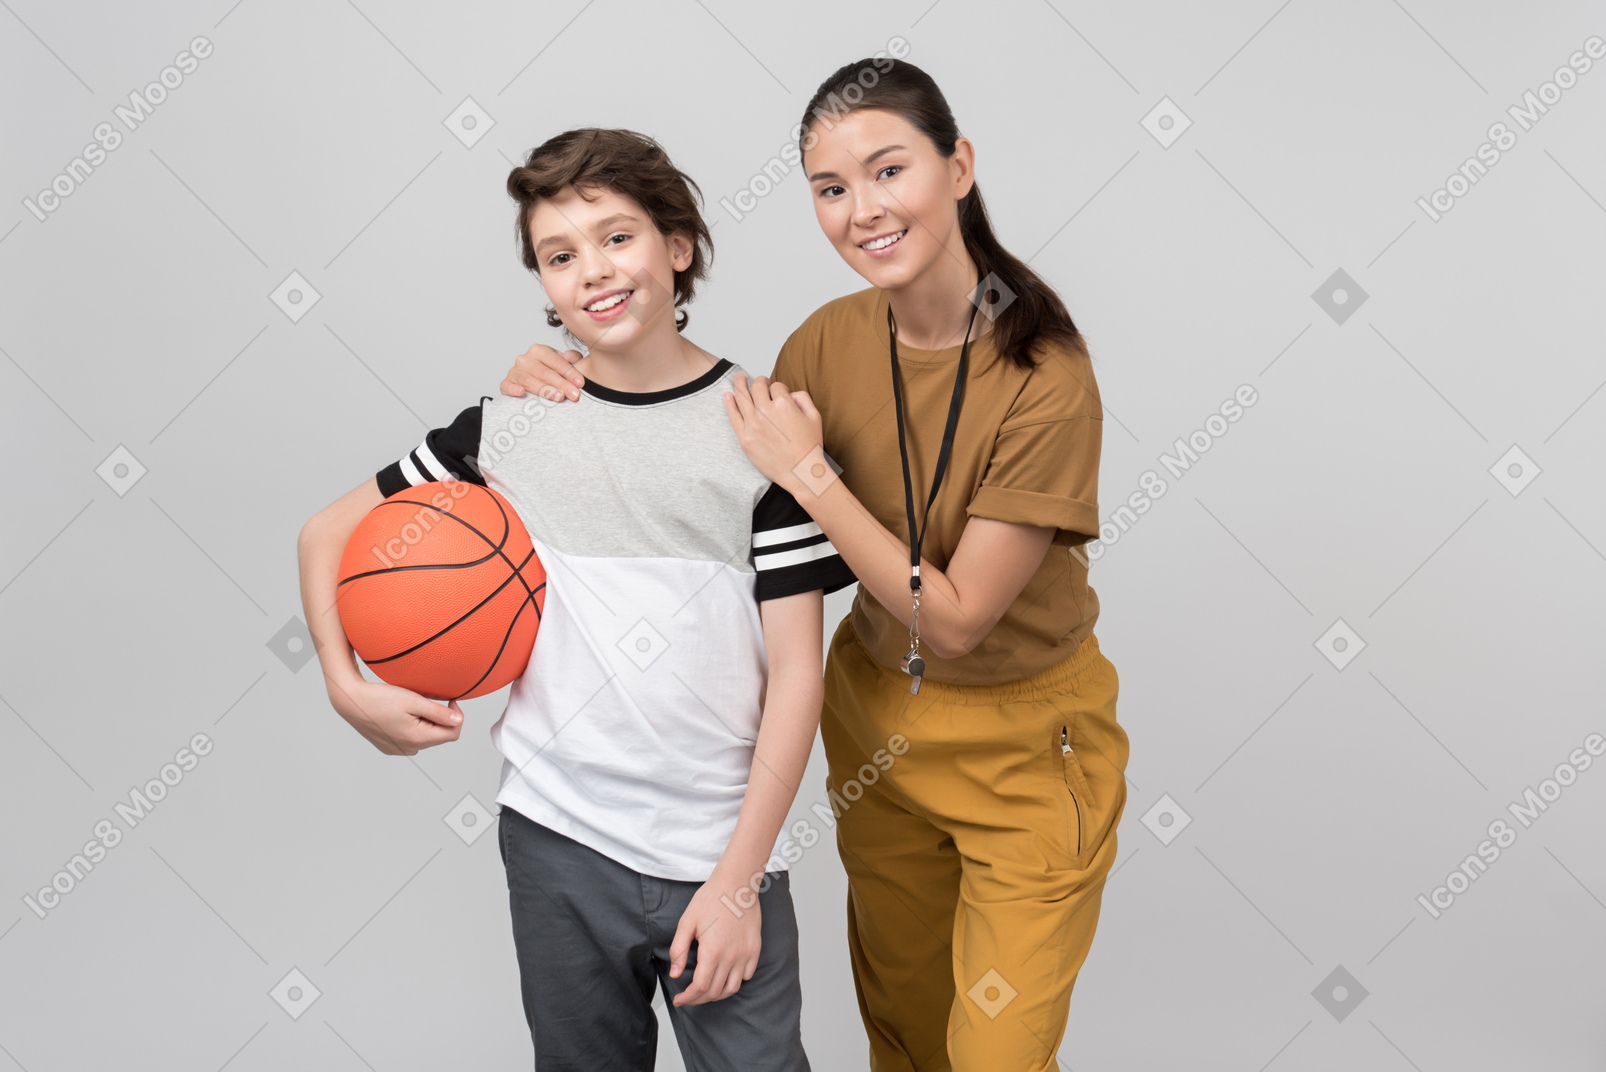 Physical education teacher holding hands in his pupil's shoulder